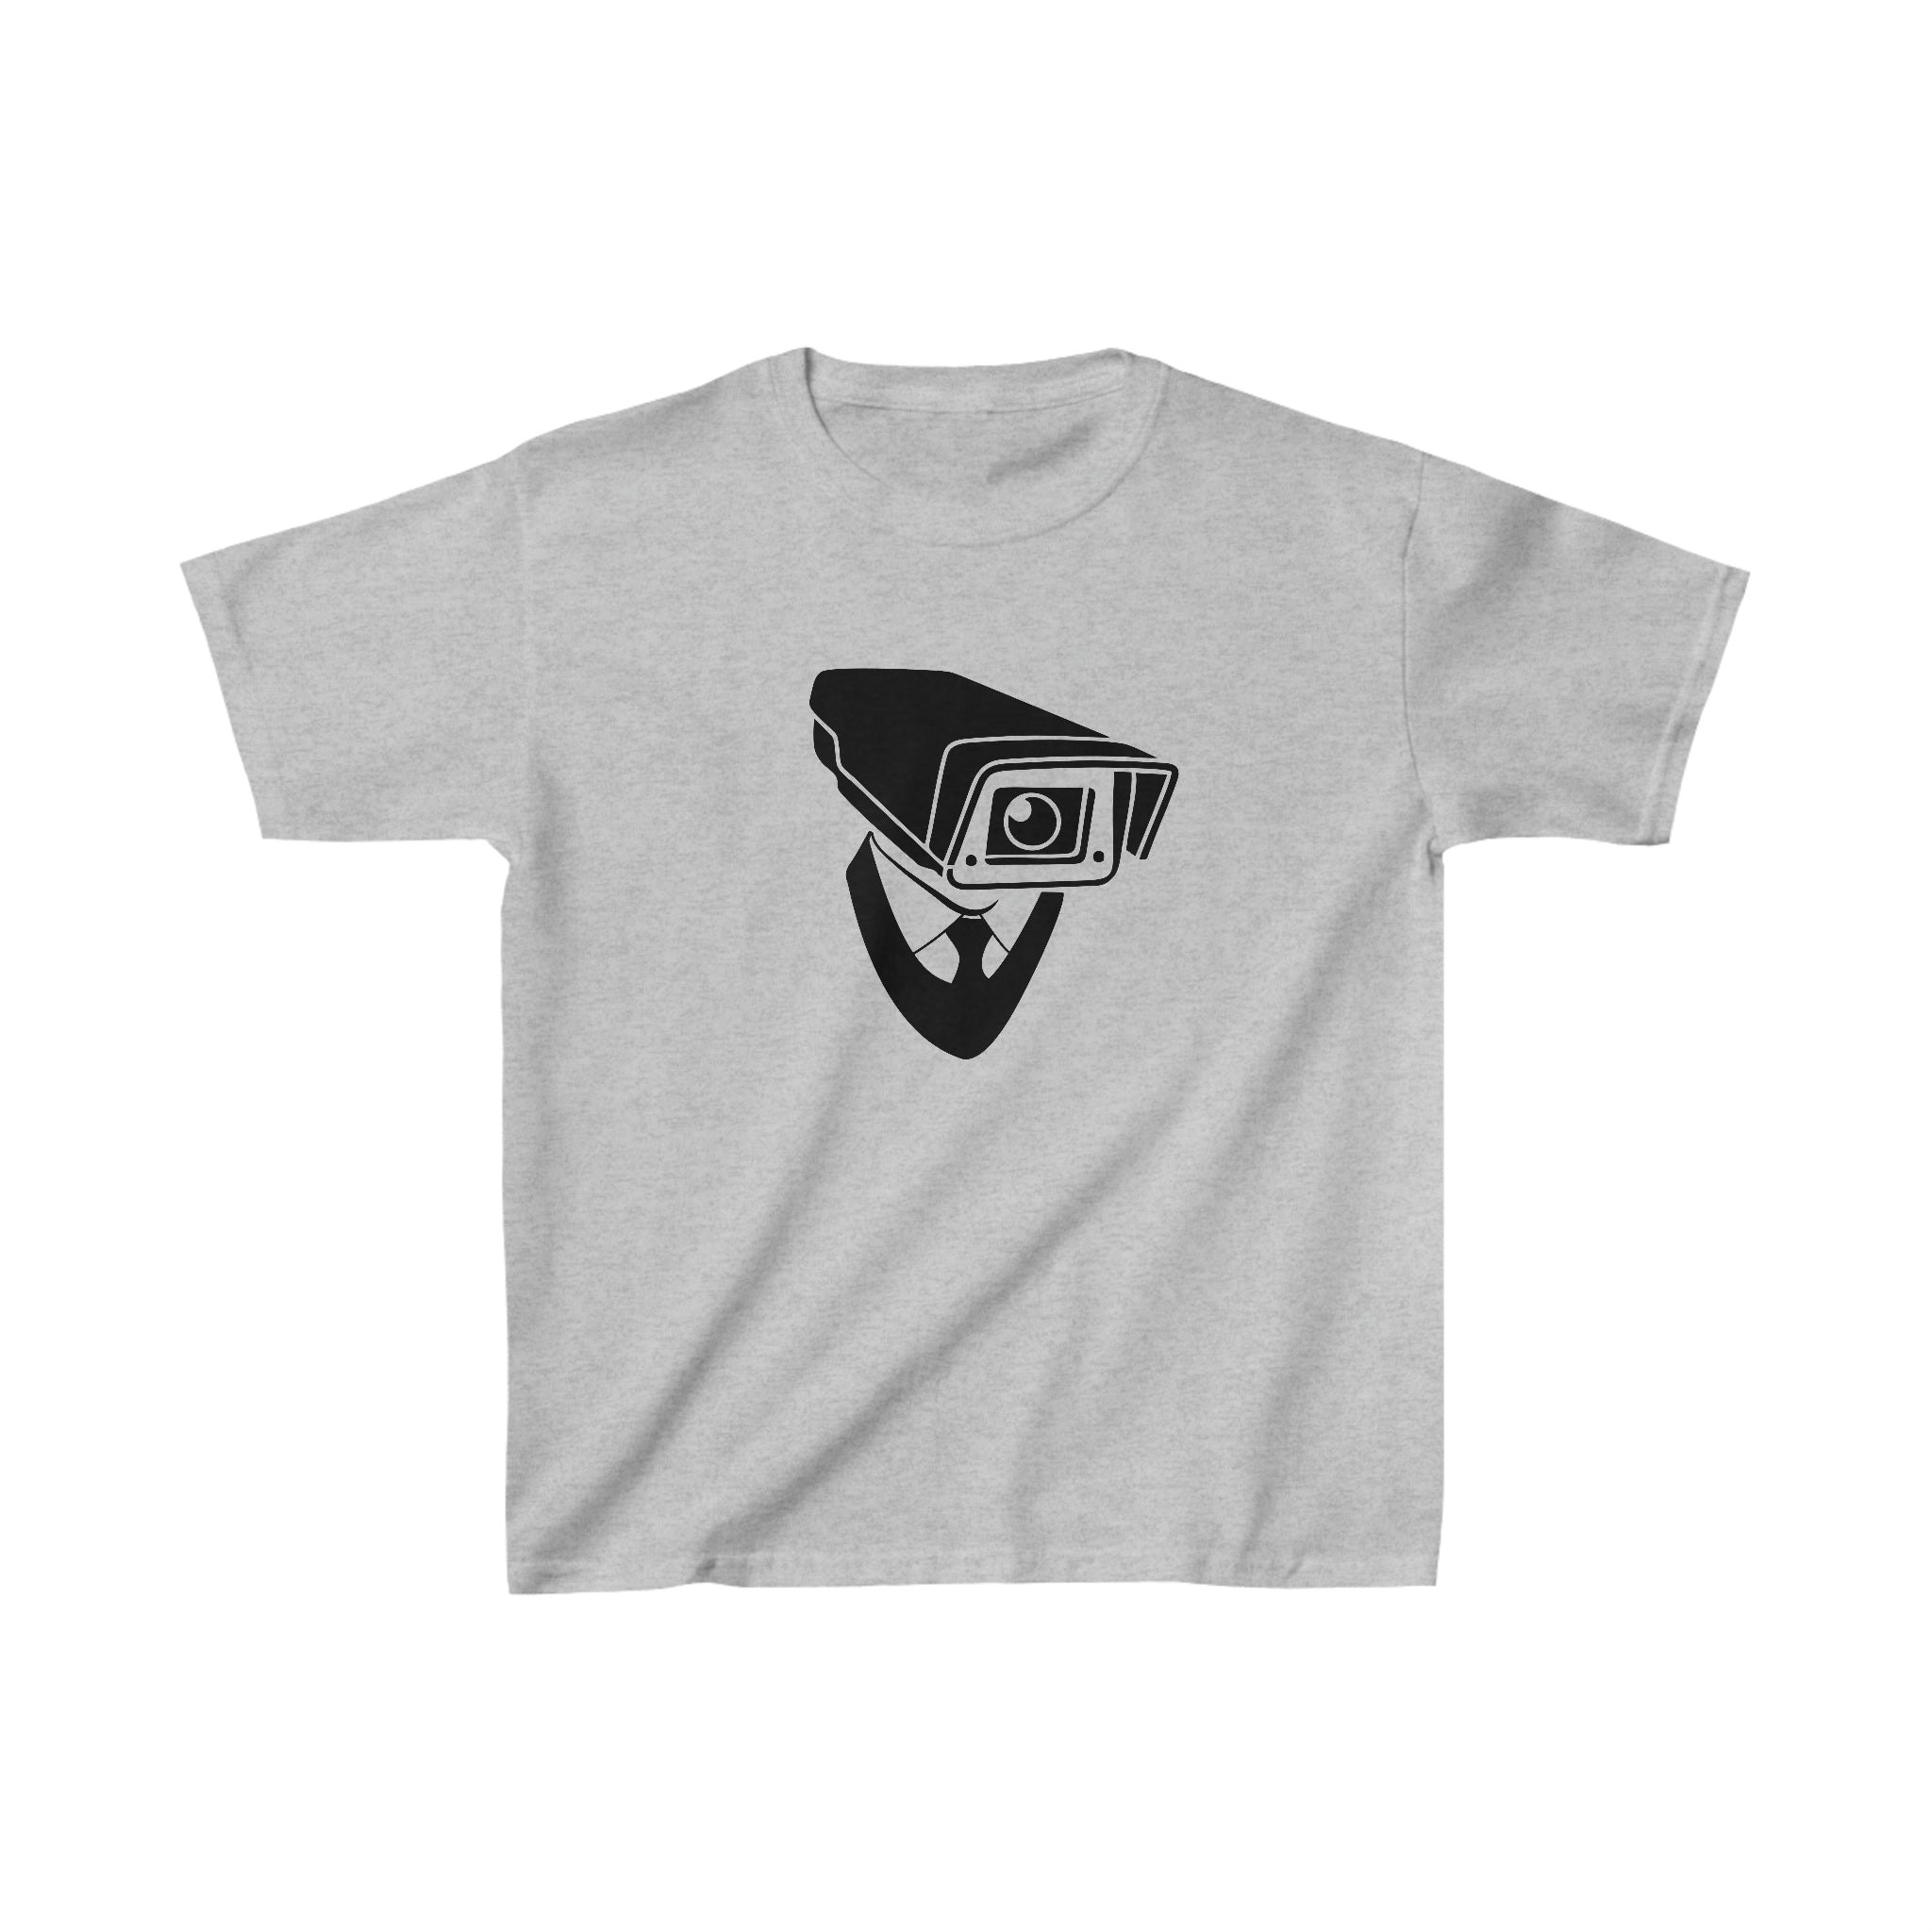 Surveillance Youth tee with the iconic cameraman centered Heather Gray Tee on White Background